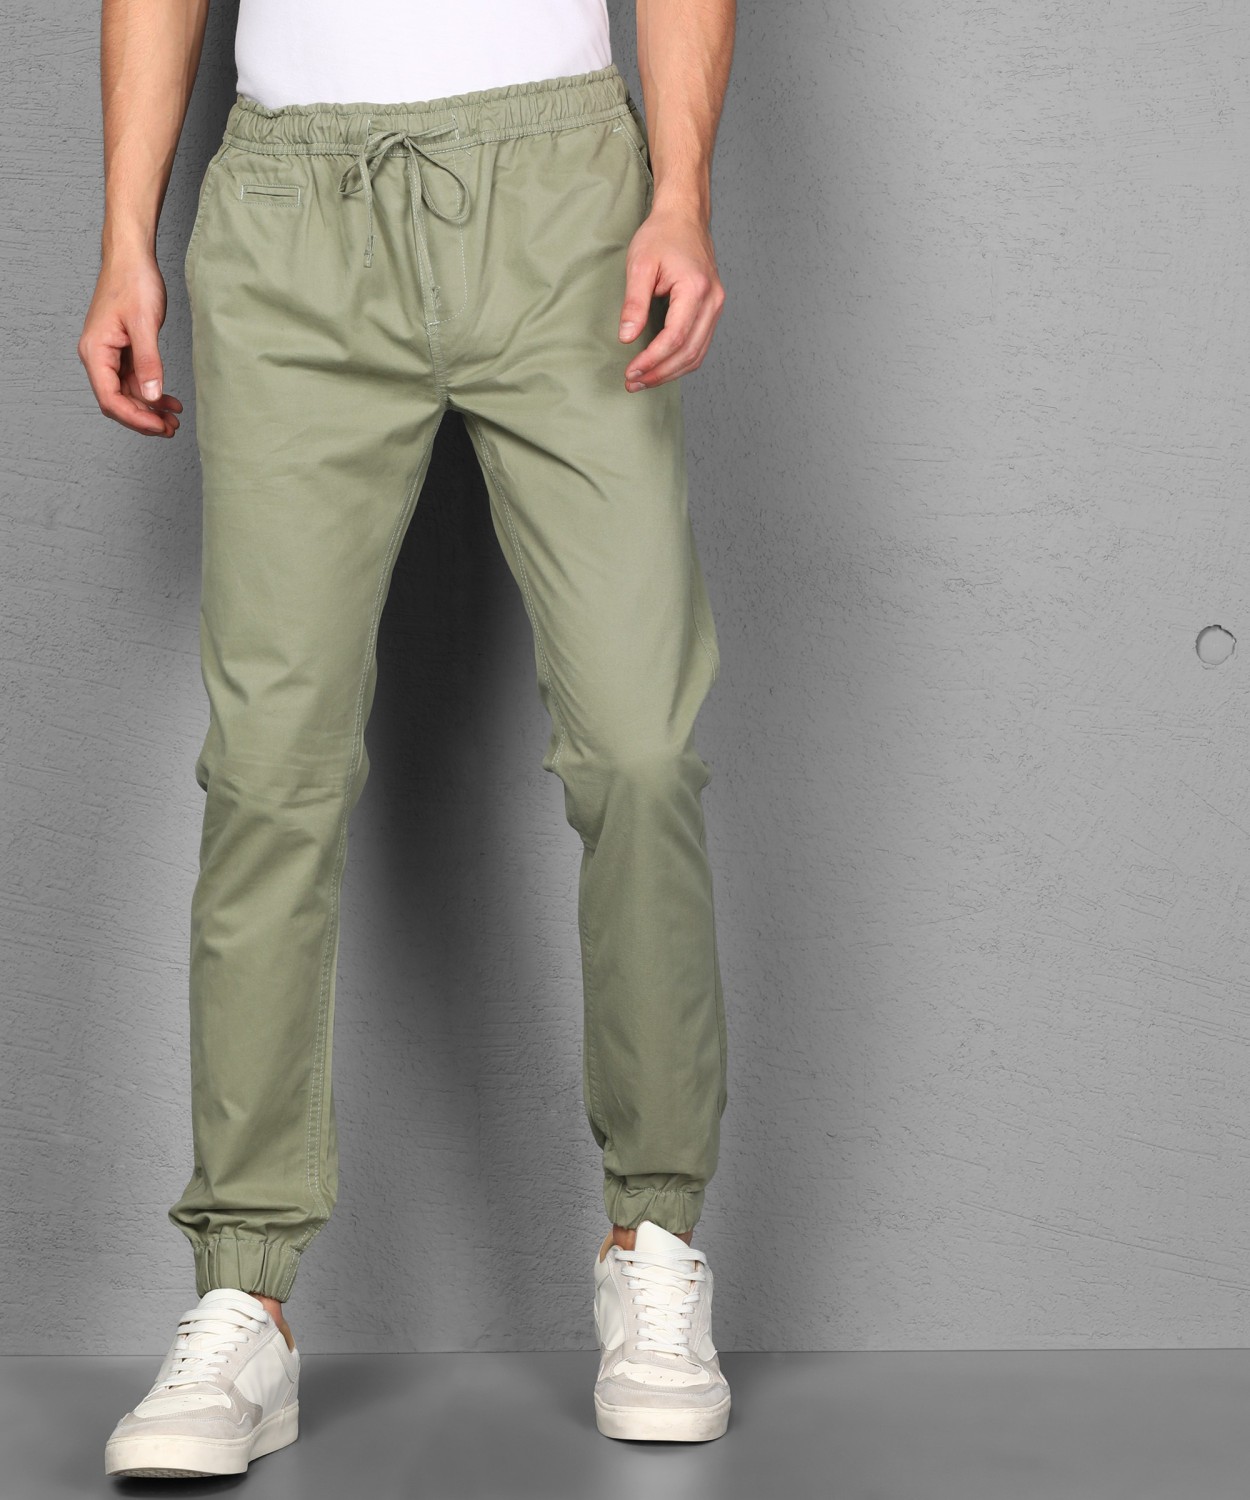 PROTOCOL Slim Fit Men Light Green Trousers  Buy PROTOCOL Slim Fit Men  Light Green Trousers Online at Best Prices in India  Flipkartcom